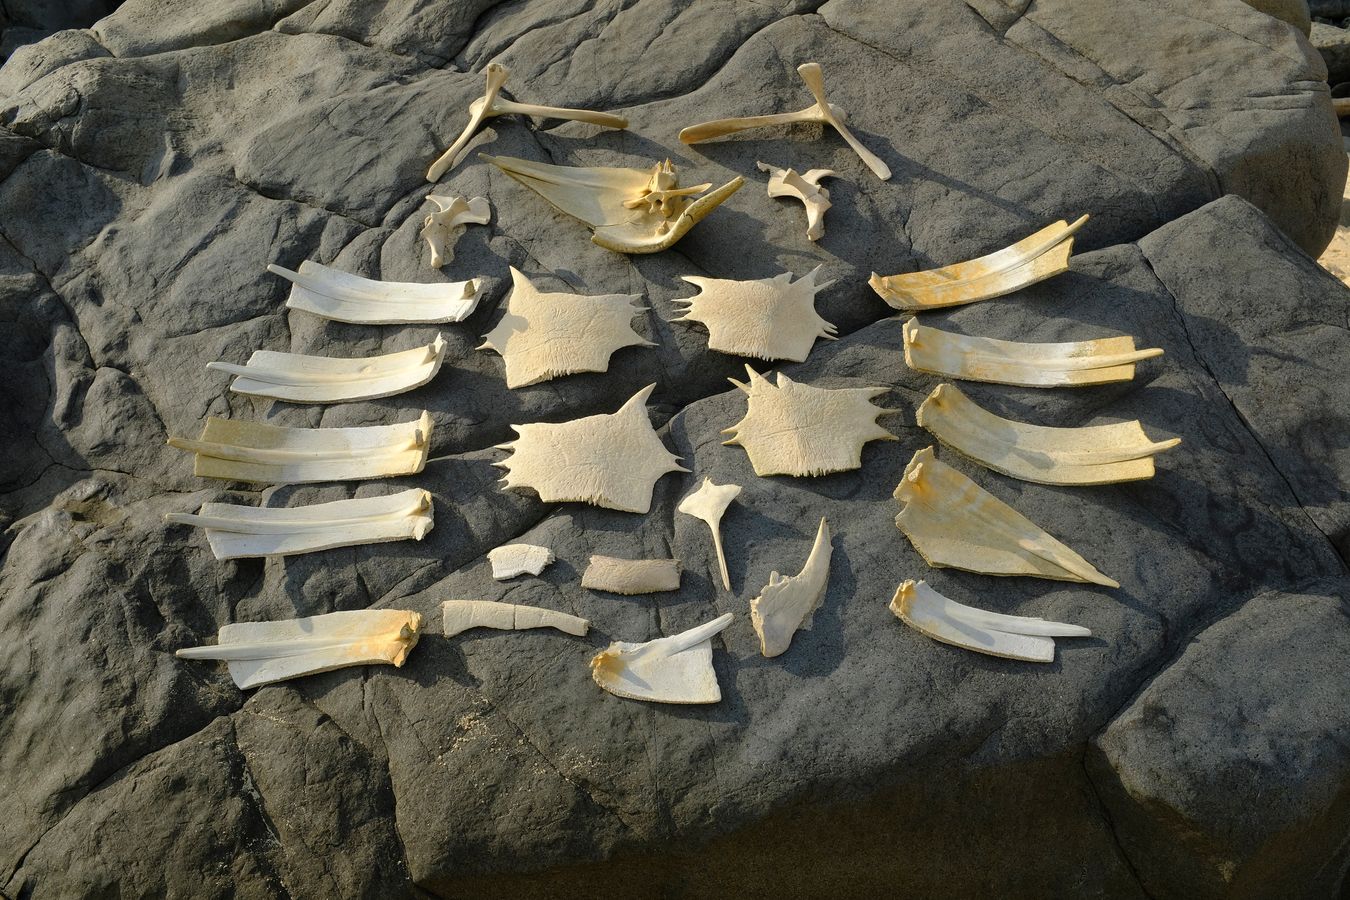 Sea turtle bones found by the author of this work among the rocks at the end of the beach, and which make up almost a complete skeleton.